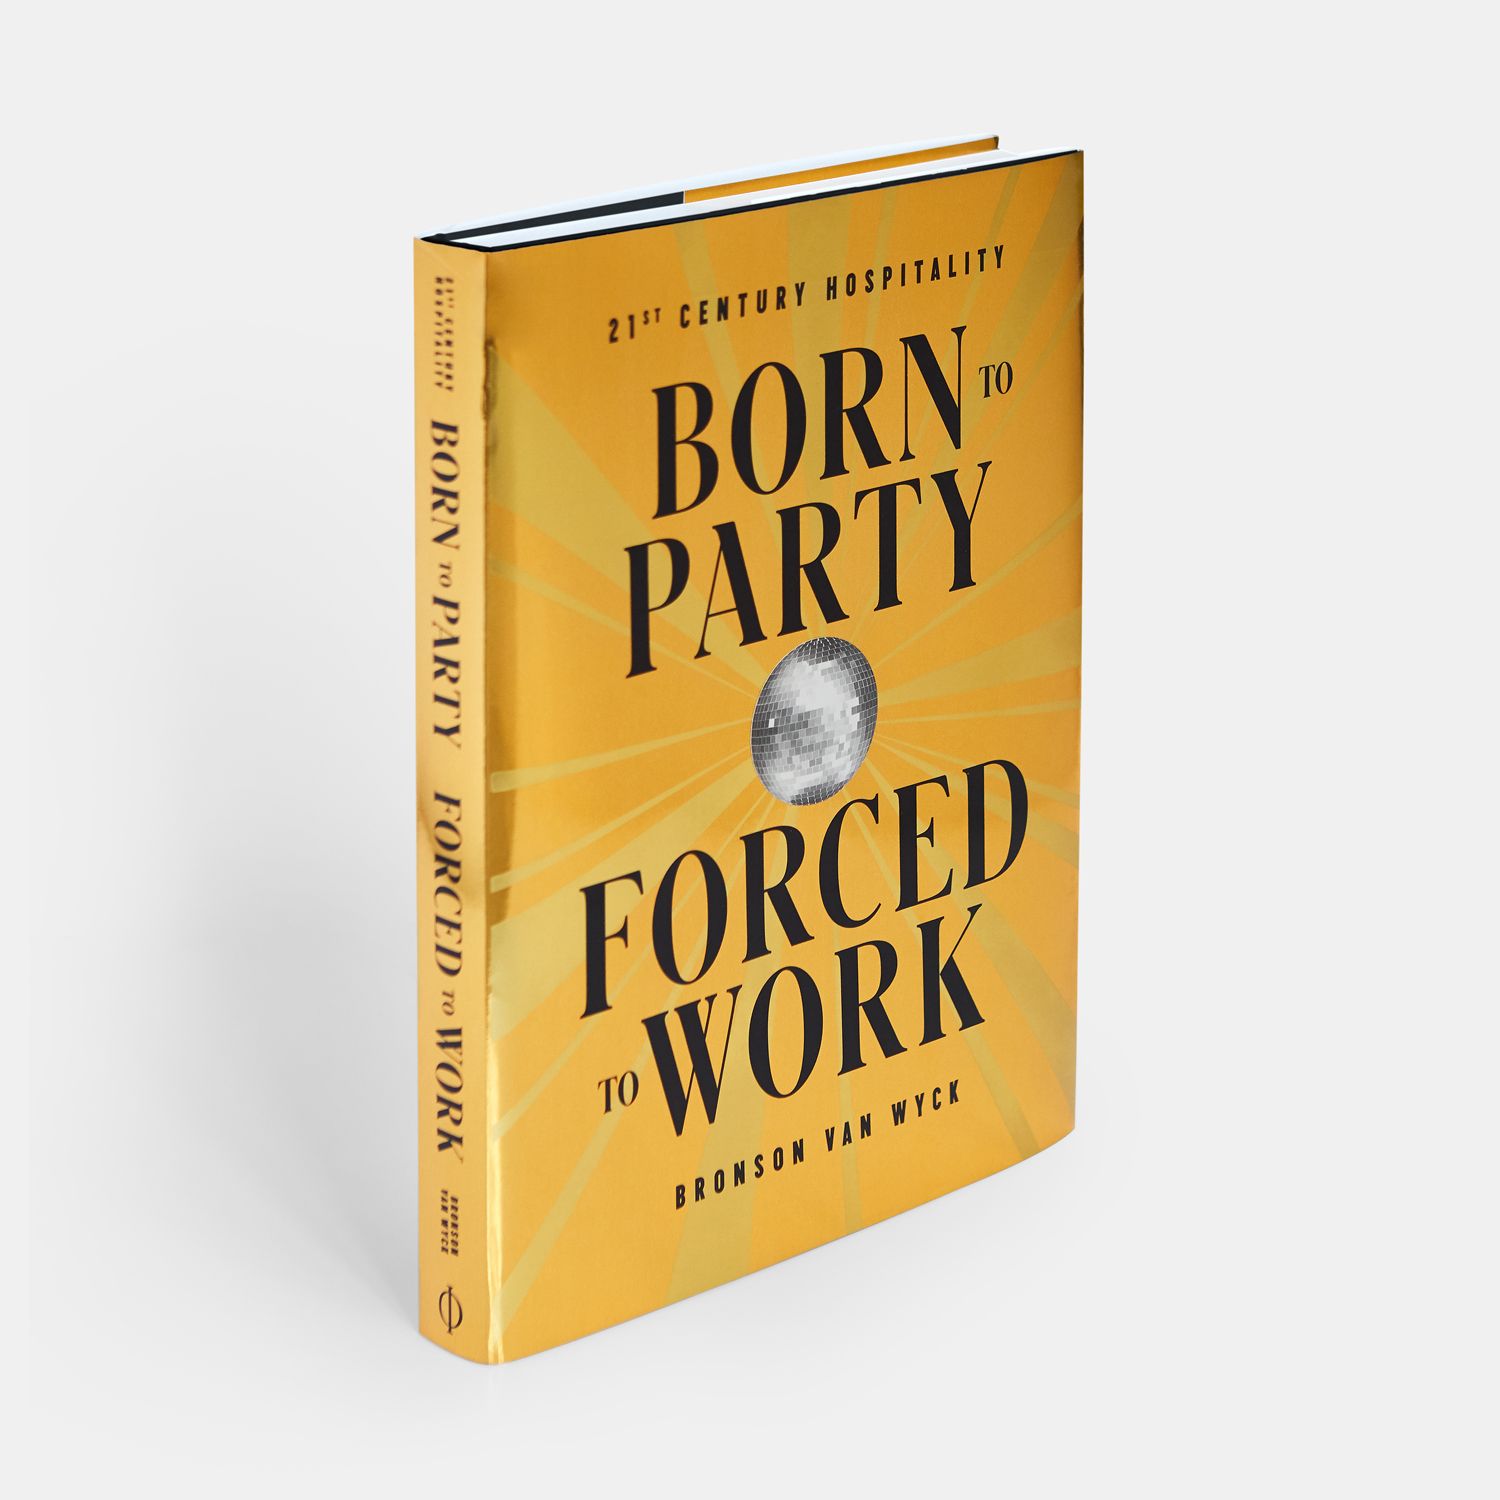 Born to Party, Forced to Work by Bronson van Wyck